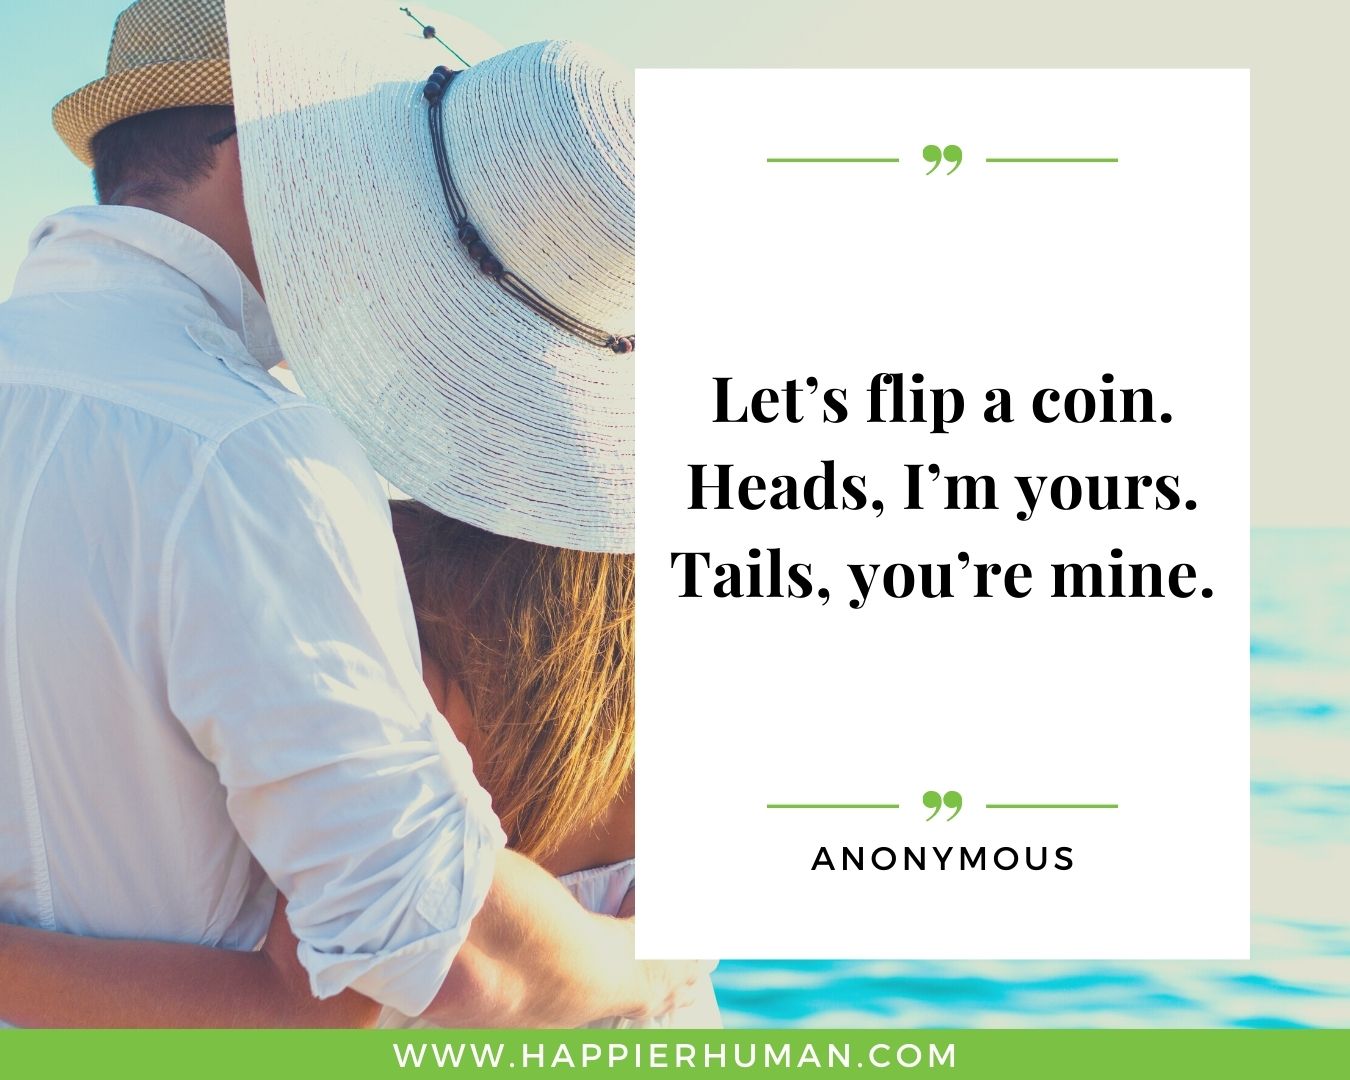 Funny Love Quotes for Her - “Let’s flip a coin. Heads, I’m yours. Tails, you’re mine.” -Anonymous